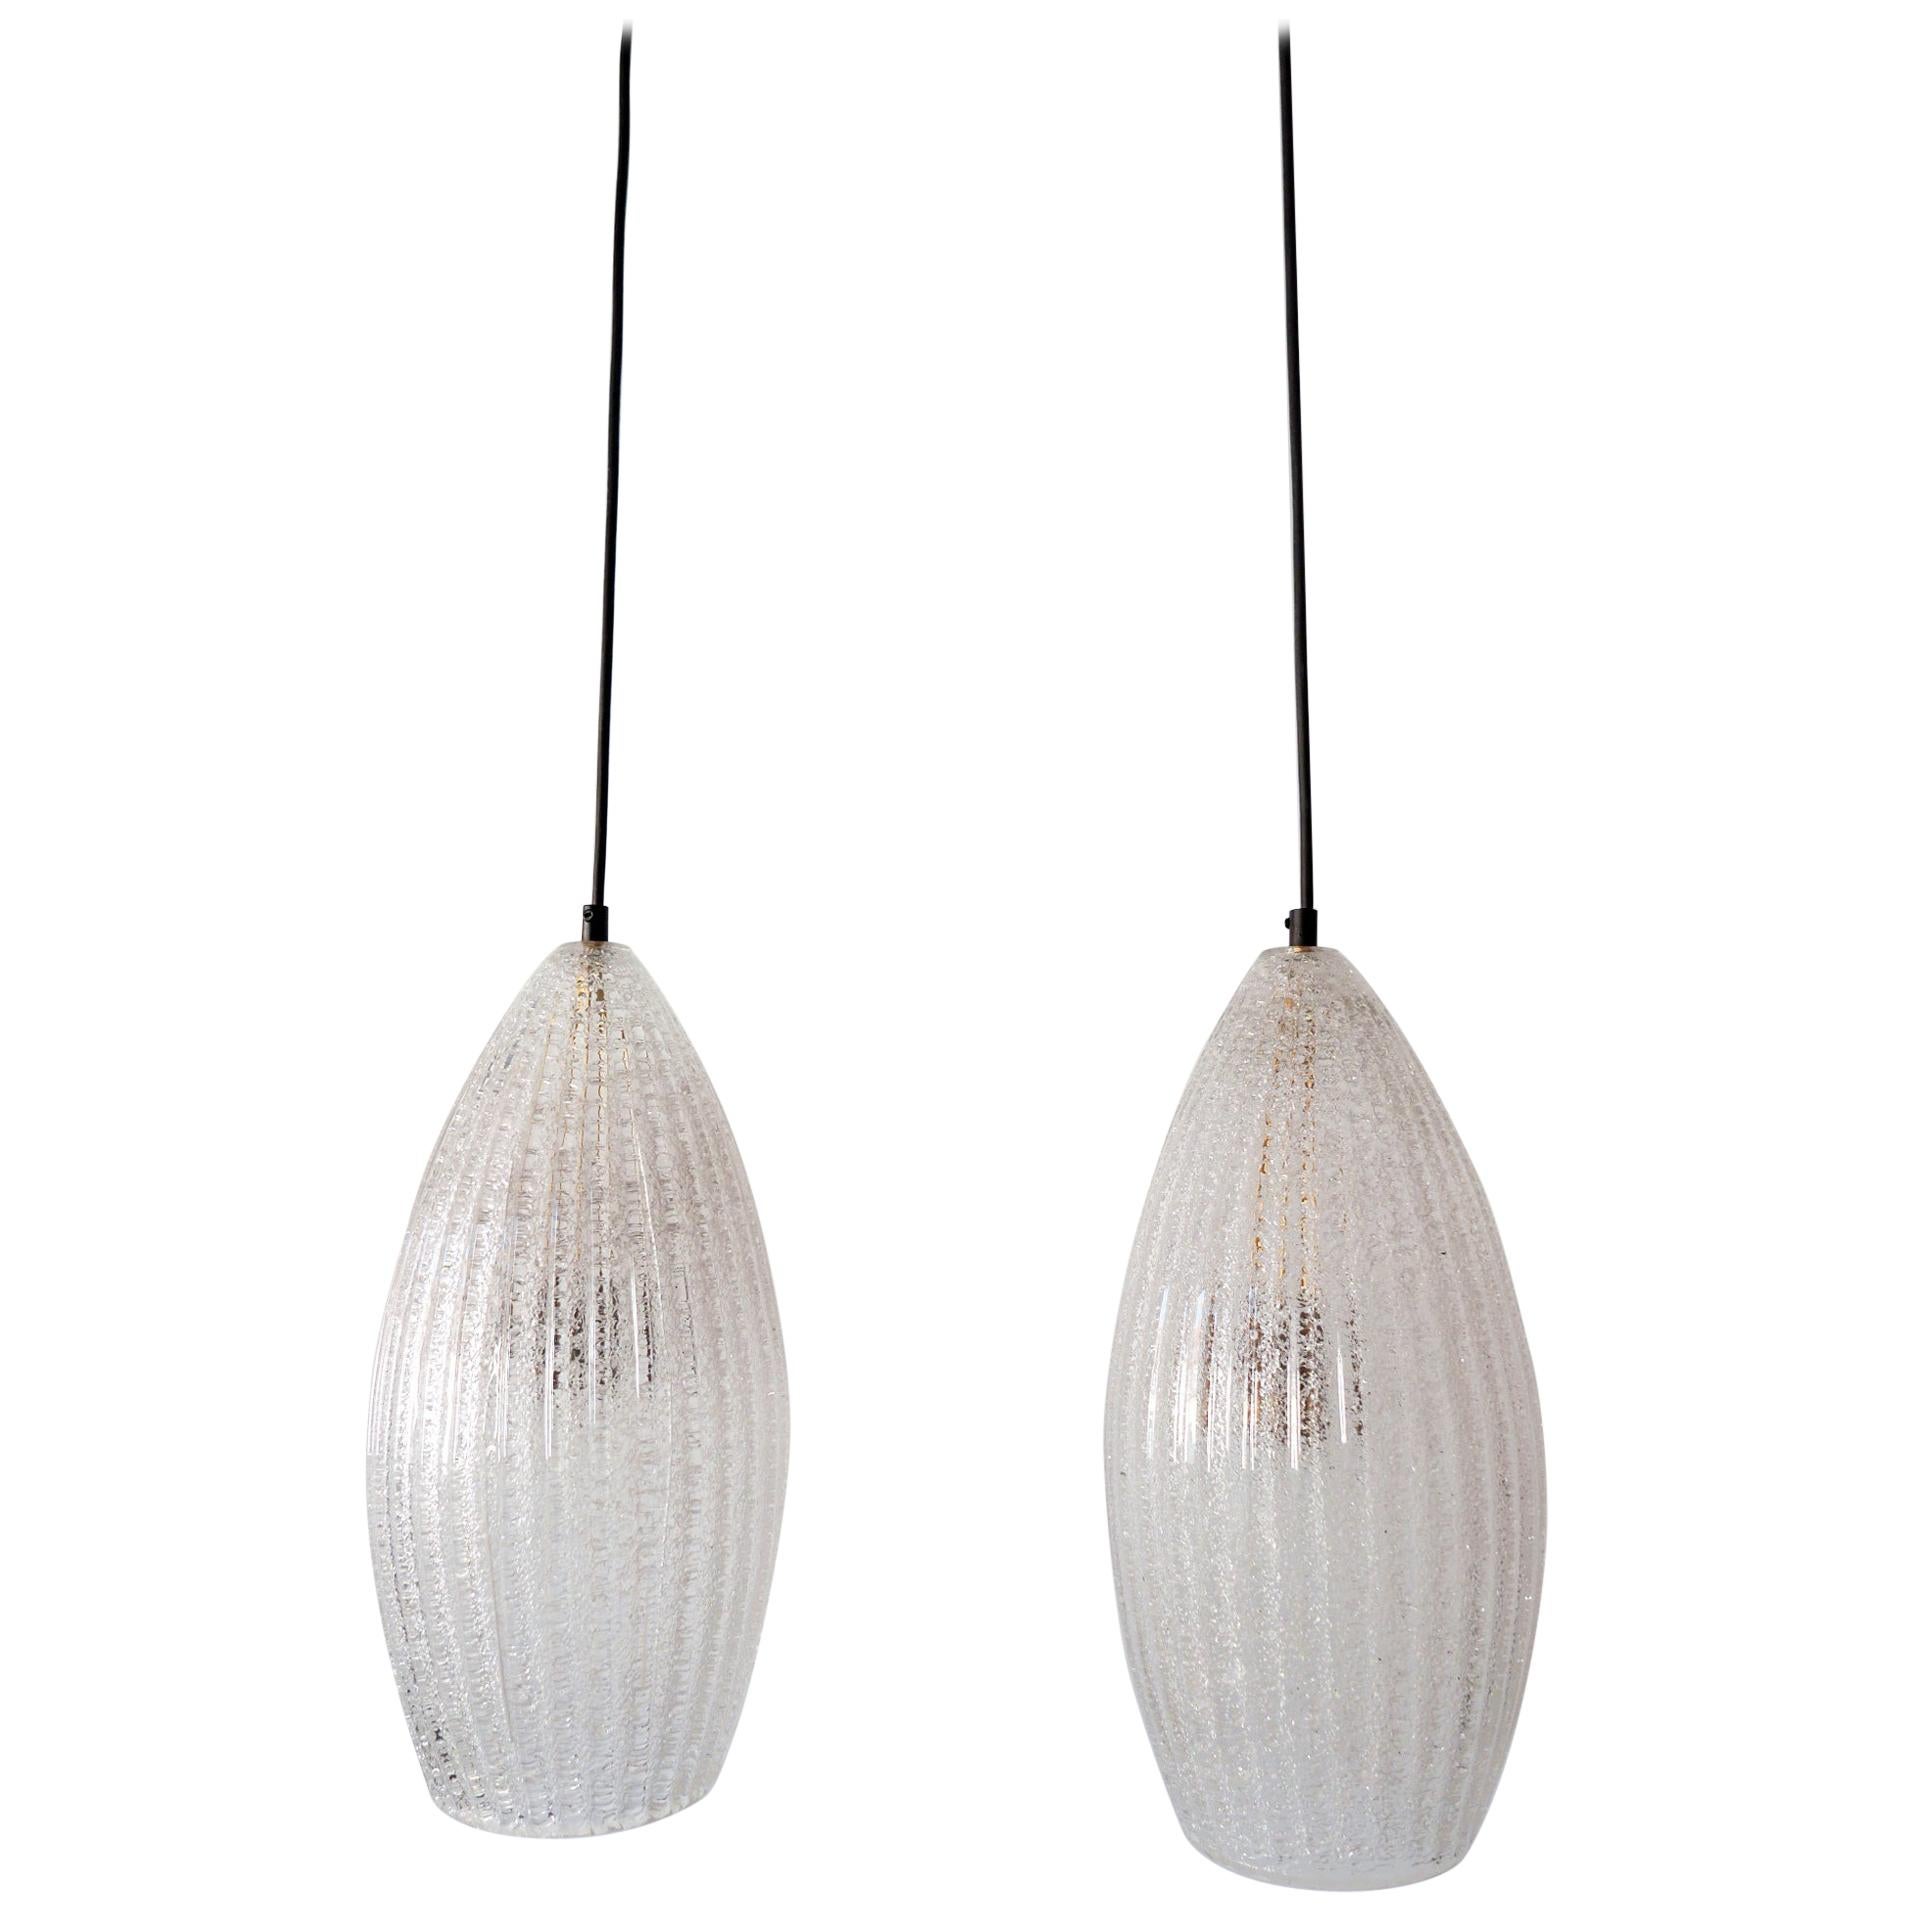 Set of Two Mid-Century Modern Textured Glass Pendant Lamps, 1960s, Germany For Sale